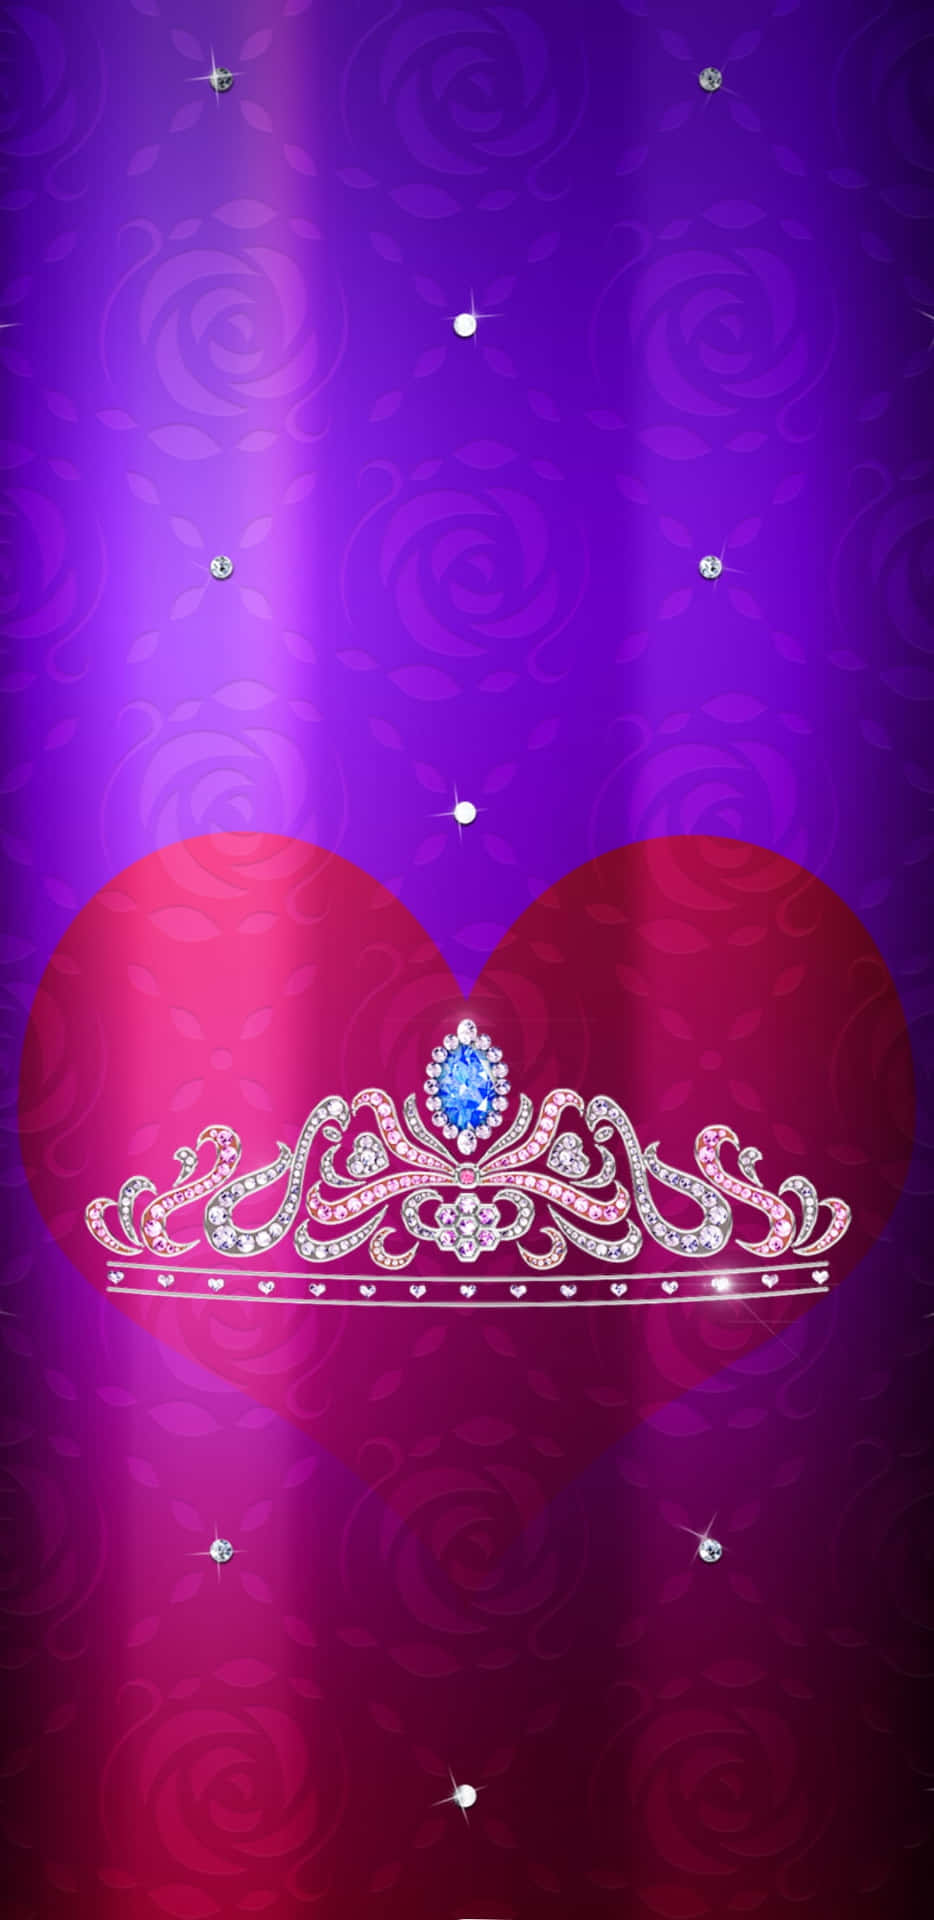 Be Regal And Majesty With This Beautiful Princess Crown. Background